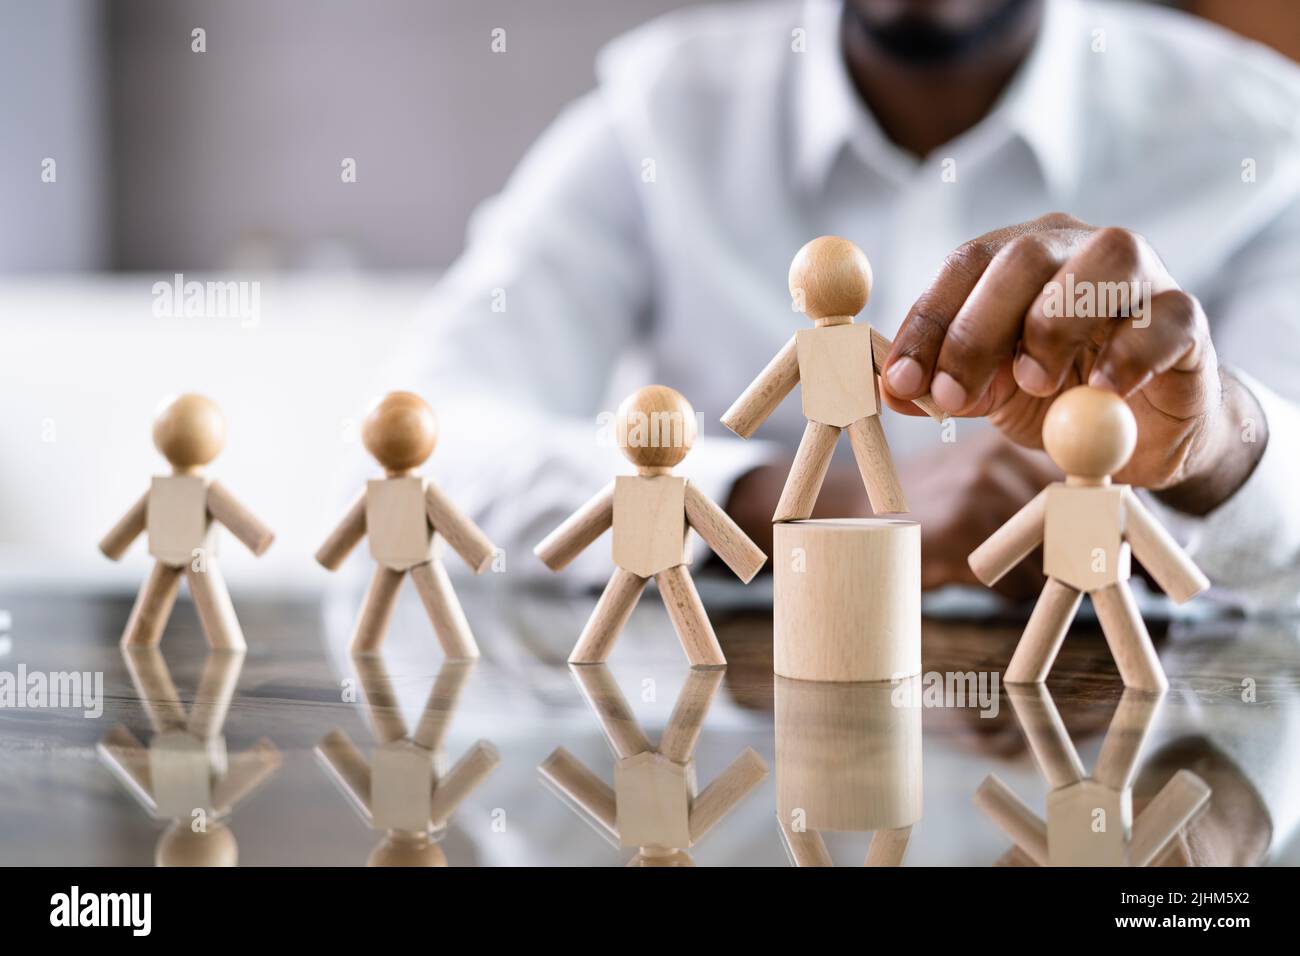 Team Lead Business Strategy Management. Business Leadership Stock Photo